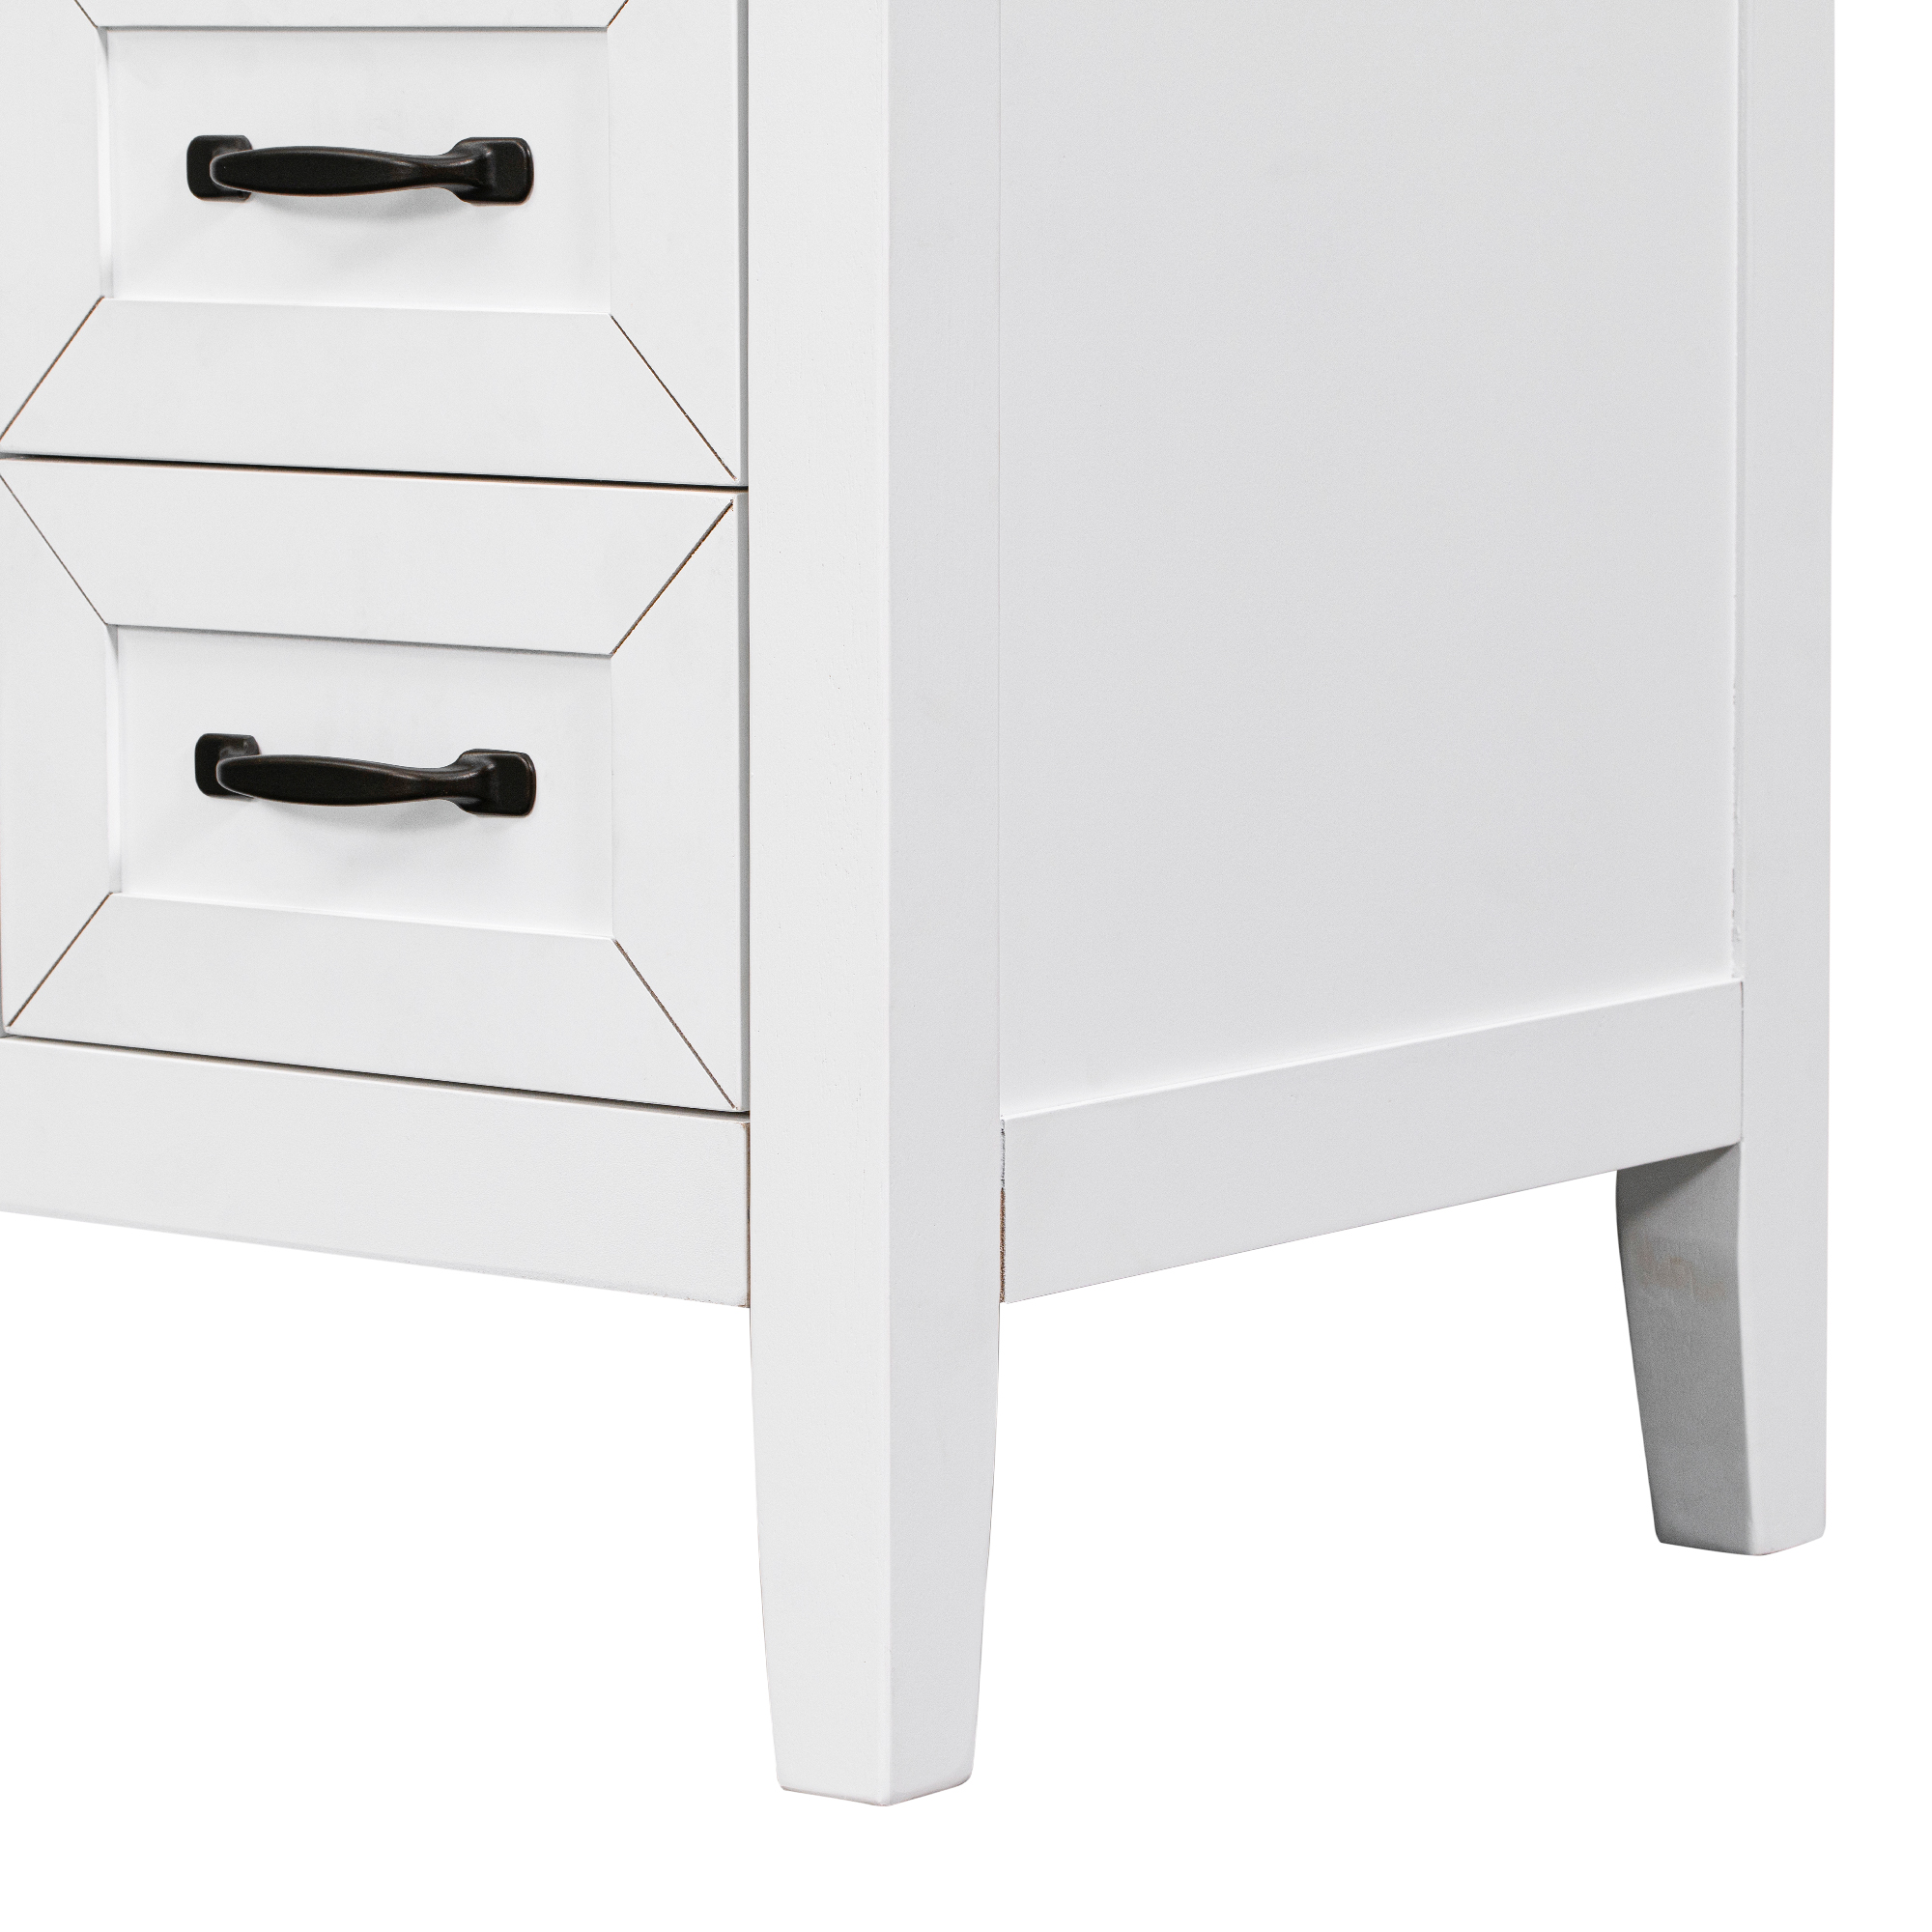 Solid Wood Bathroom Cabinet with Drawers - WF296707AAK